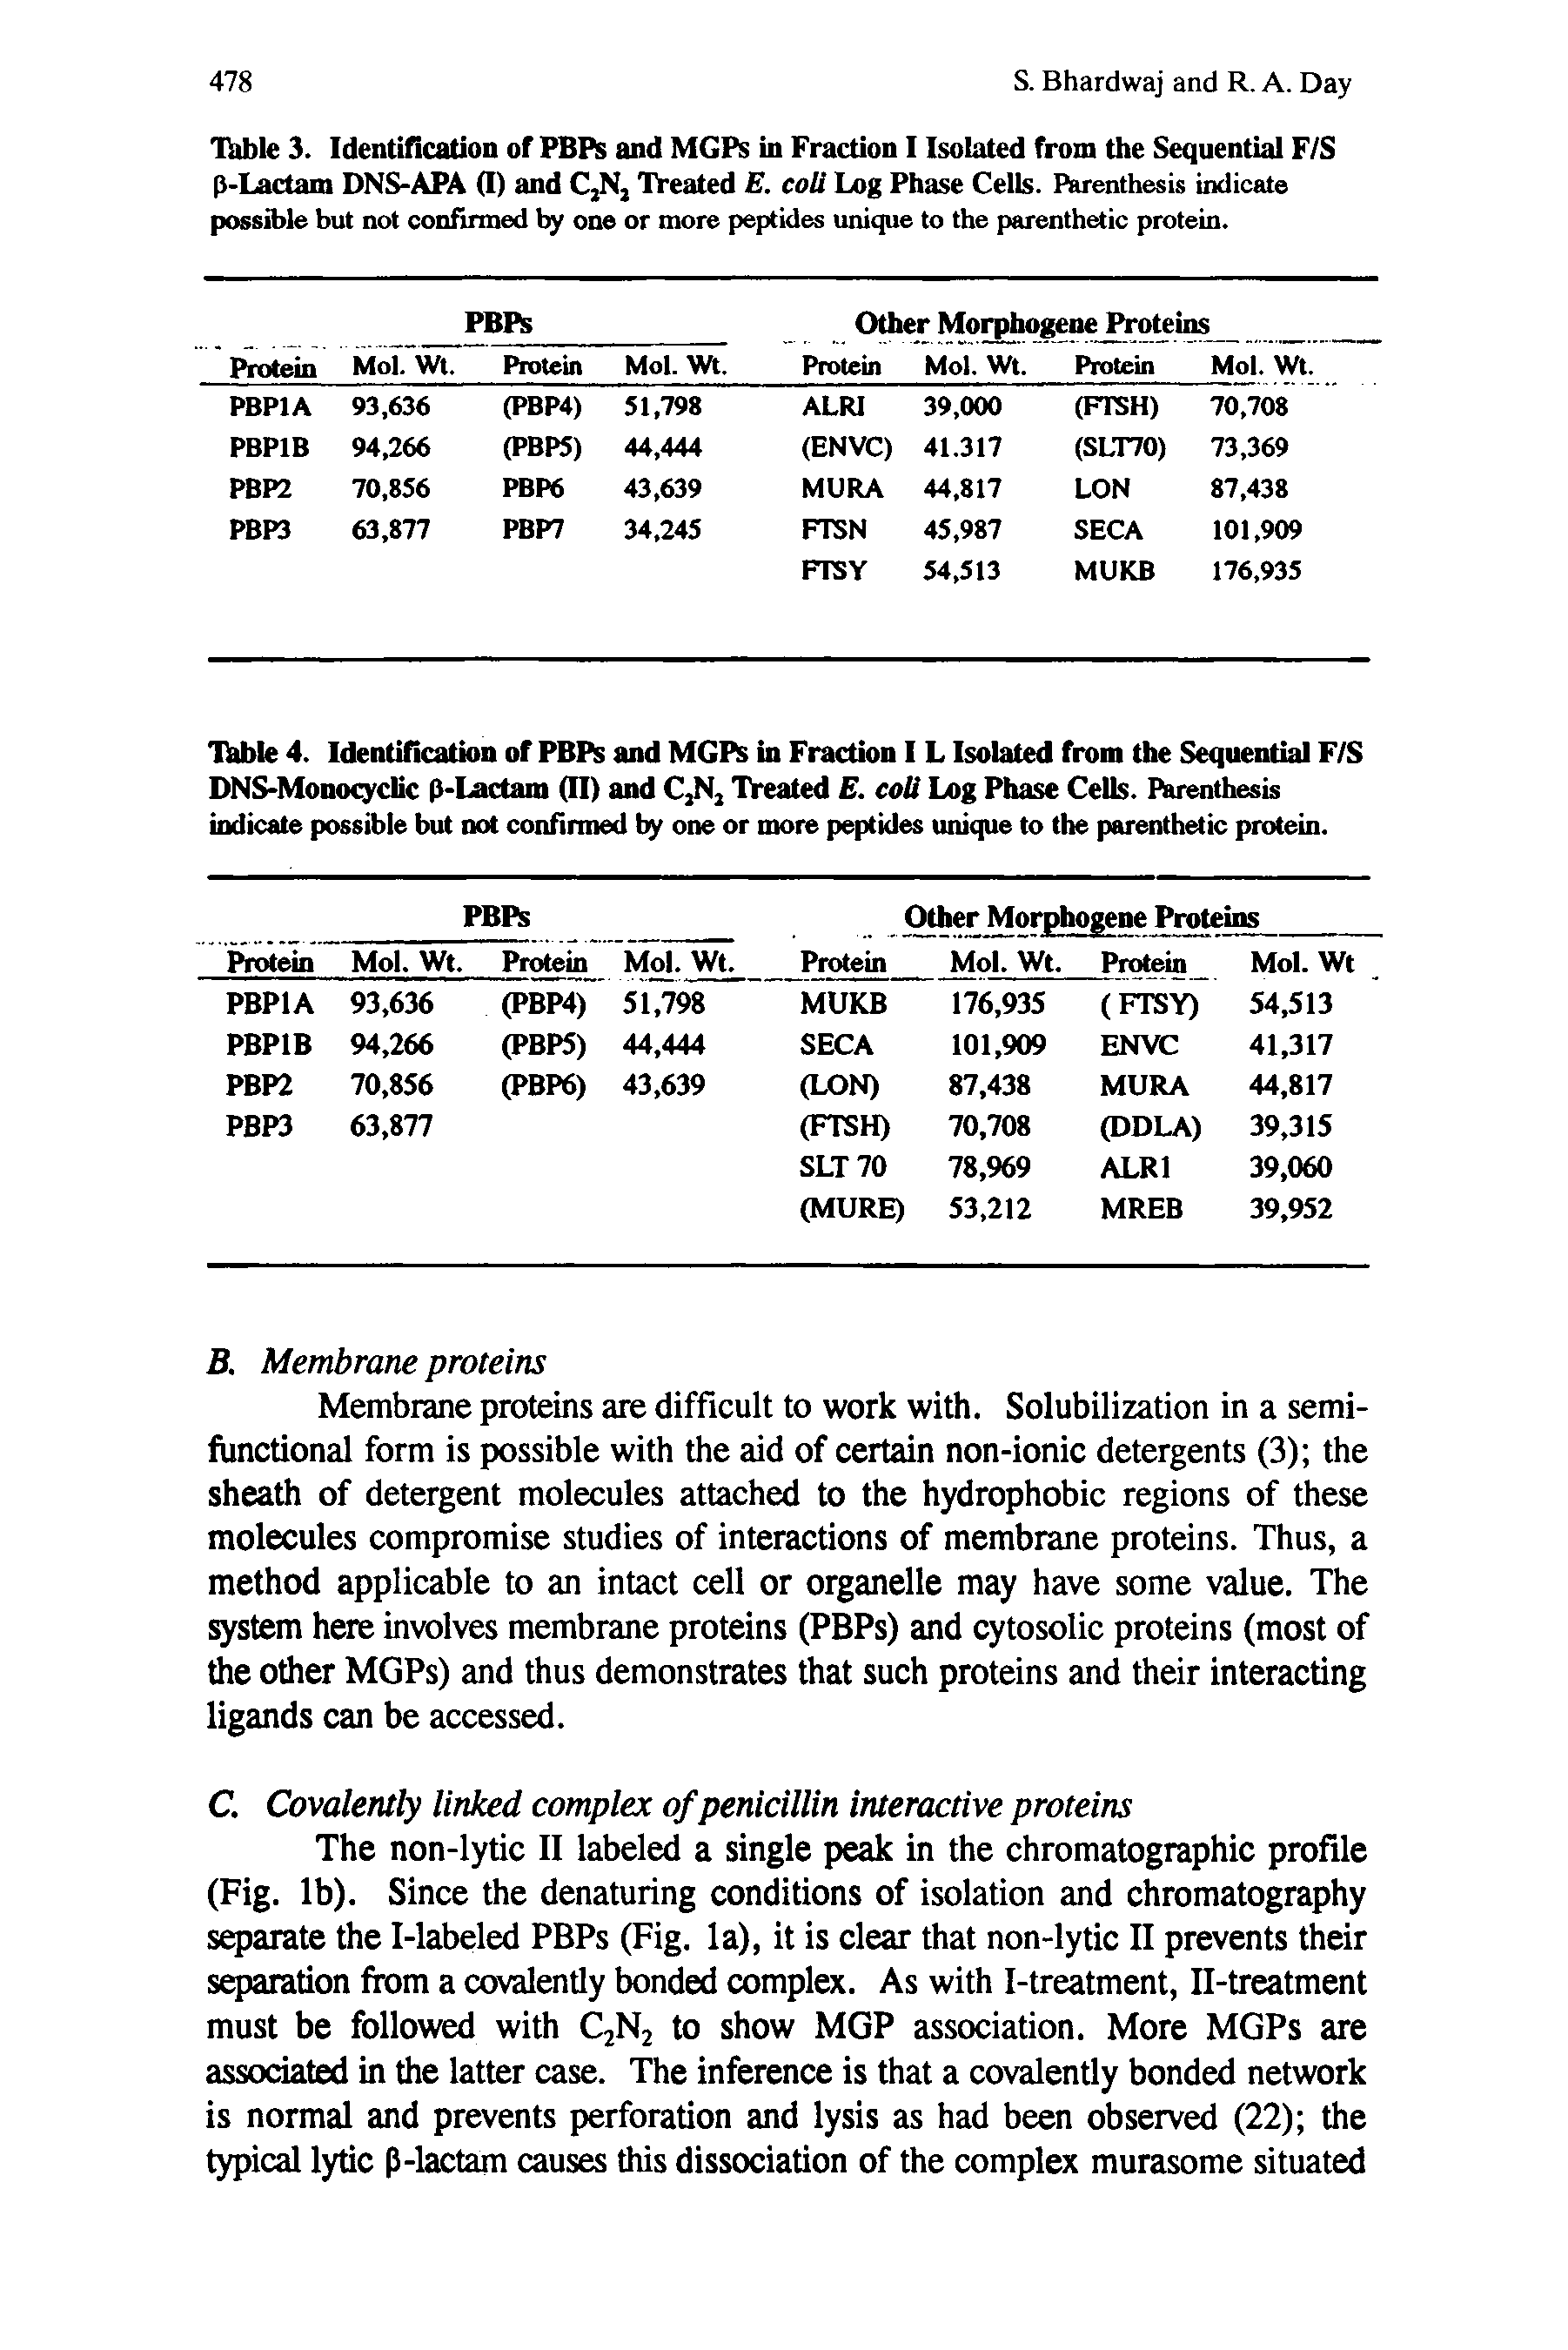 Table 4. Identification of PBPs and MGPS in Fraction I L Isolated from the Sequential F/S DNS-Monocyclic p-Lactam (II) and Treated E. coU Log Phase Cells. Parenthesis indicate possible but not confirmed by one or more peptides unique to the parenthetic protein.